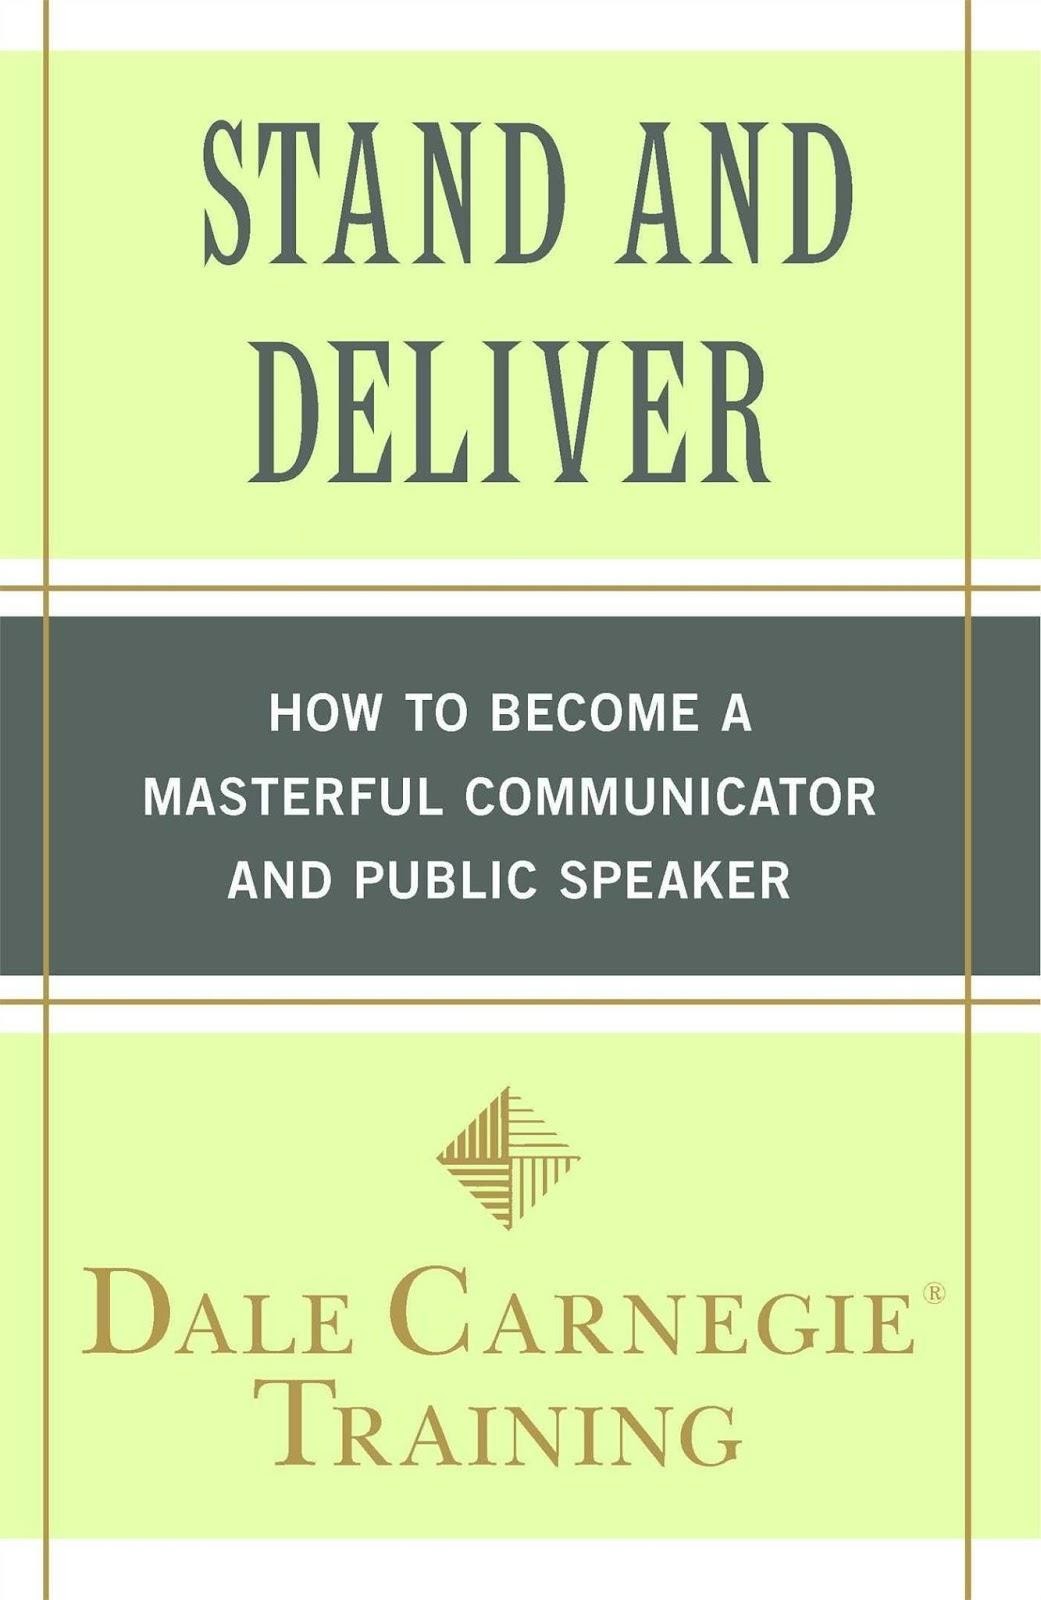 Book 'Stand and Deliver' Dale Carnegie